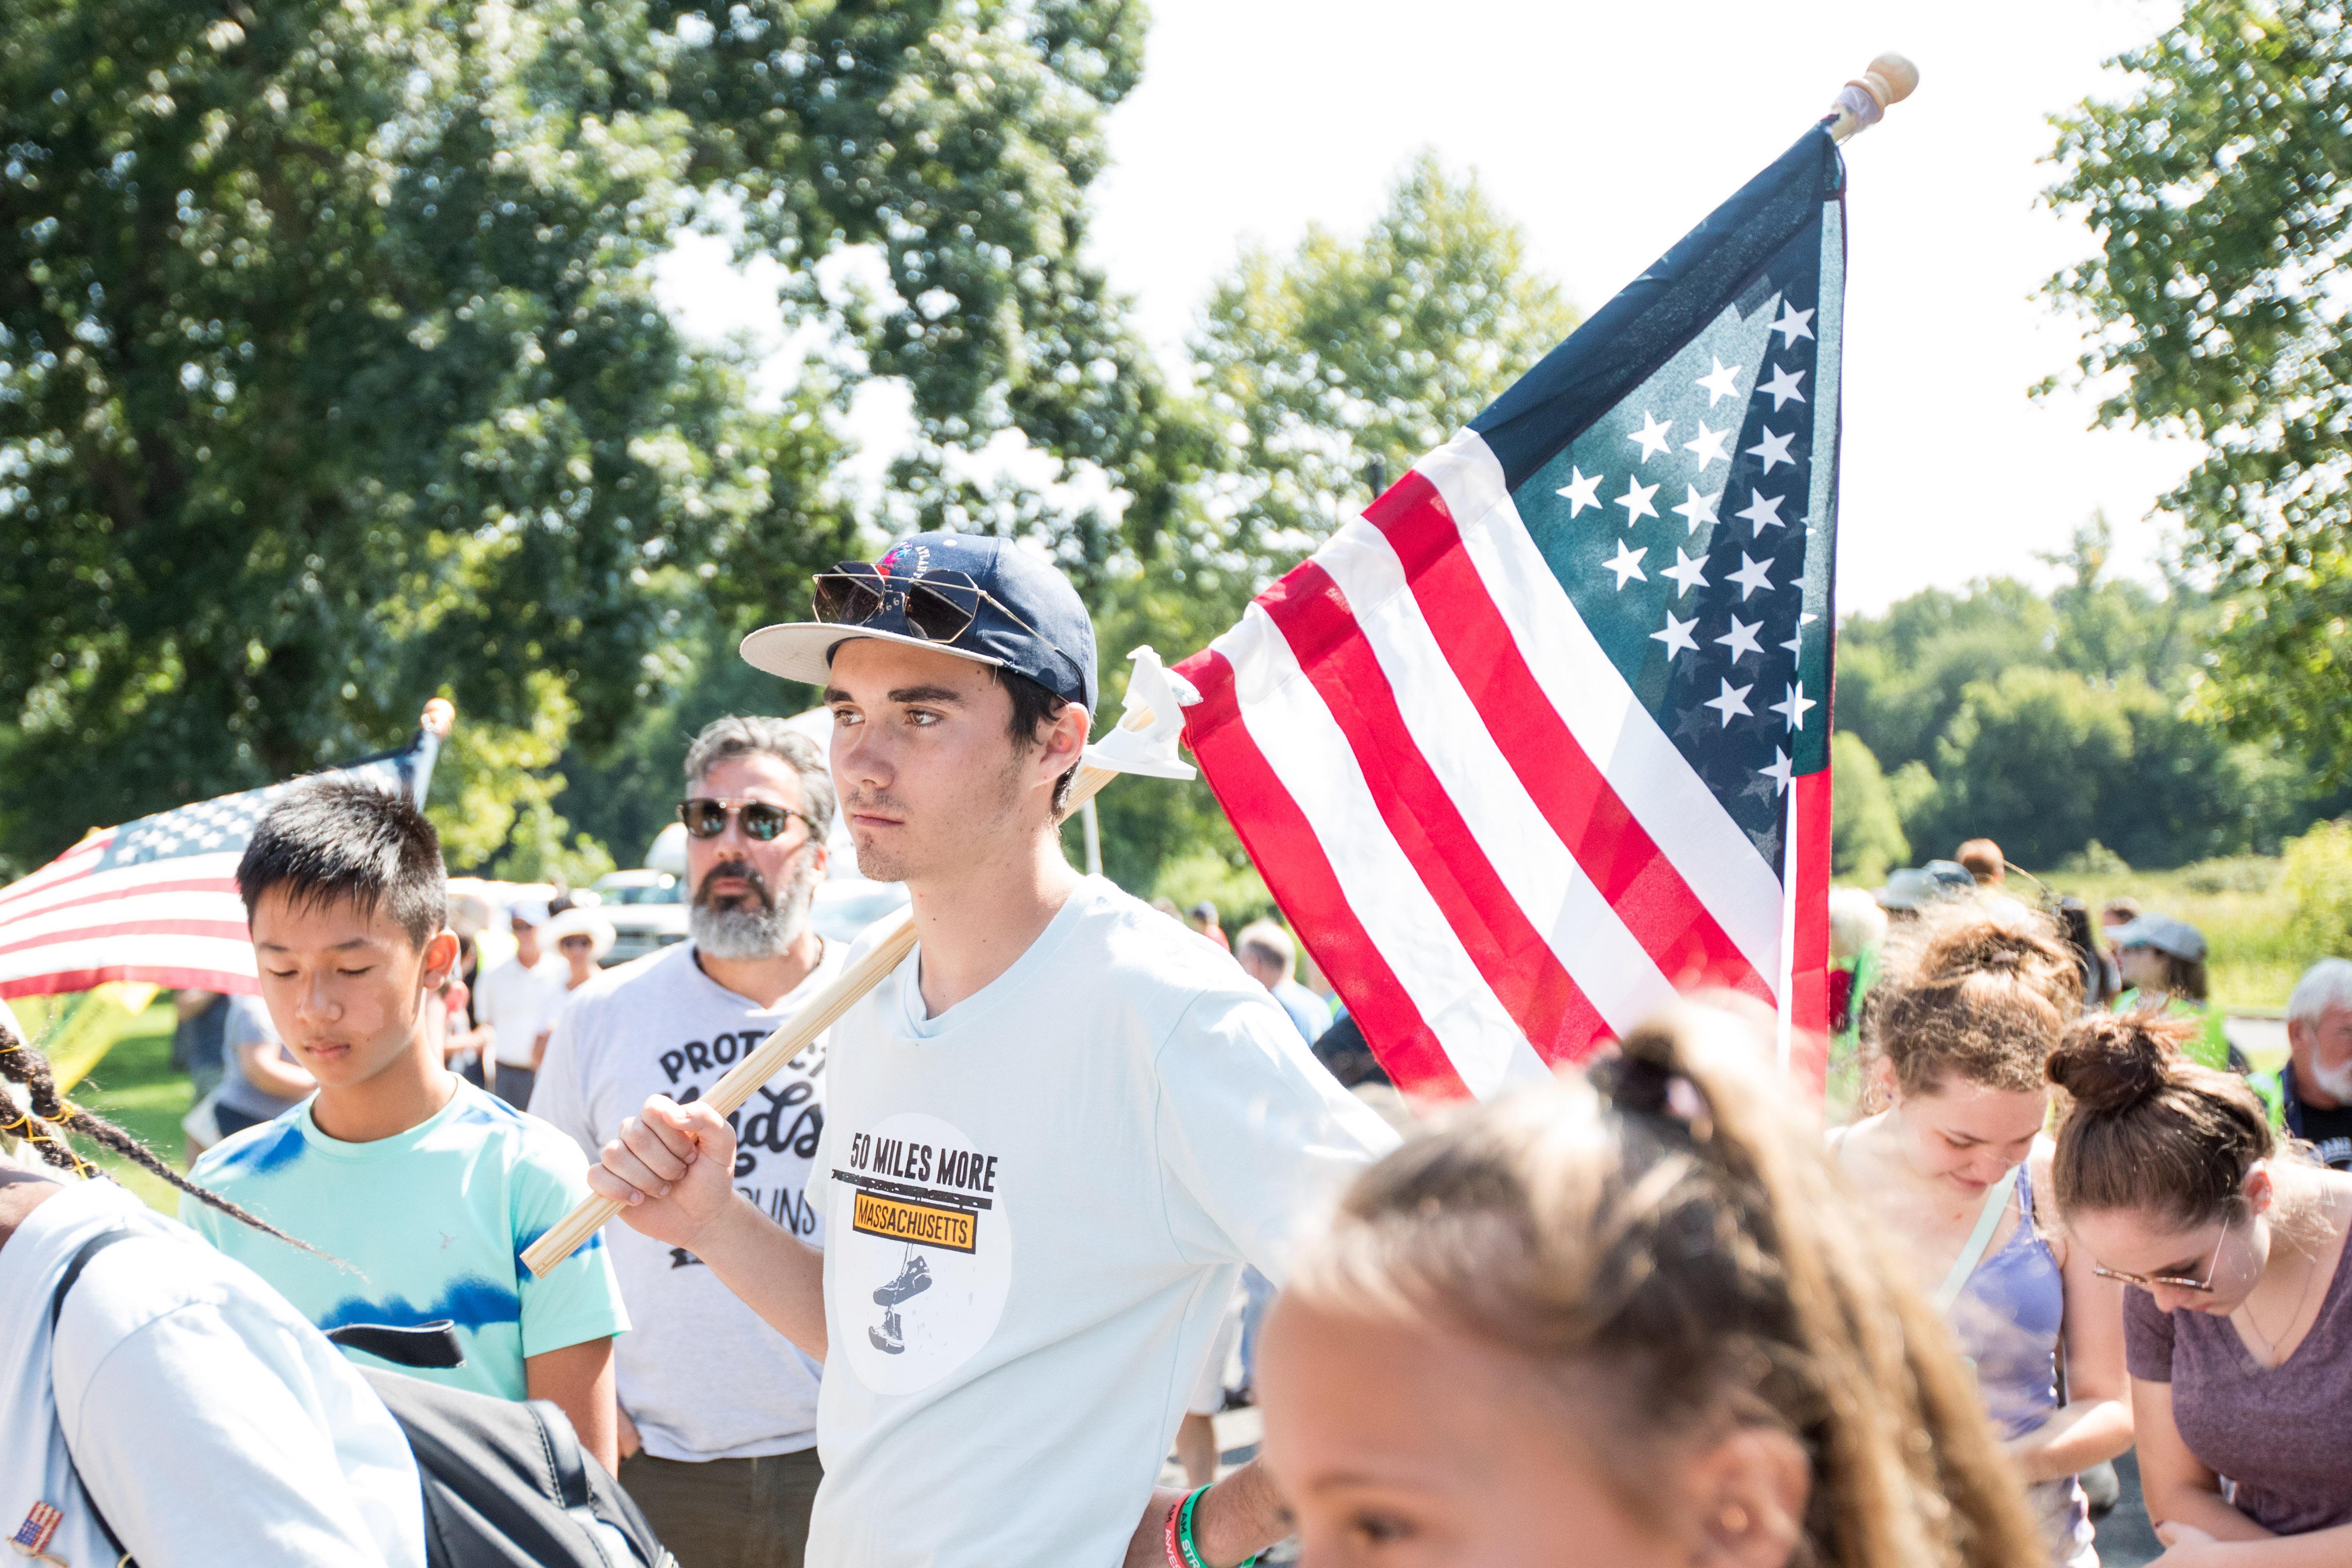 Activists including Parkland Shooting survivor and activist David Hogg gather before the final mile of the 50 Miles More walk against gun violence which ends with a rally at the Smith and Wesson Firearms factory on August 26, 2018 in Springfield, Massachusetts. 